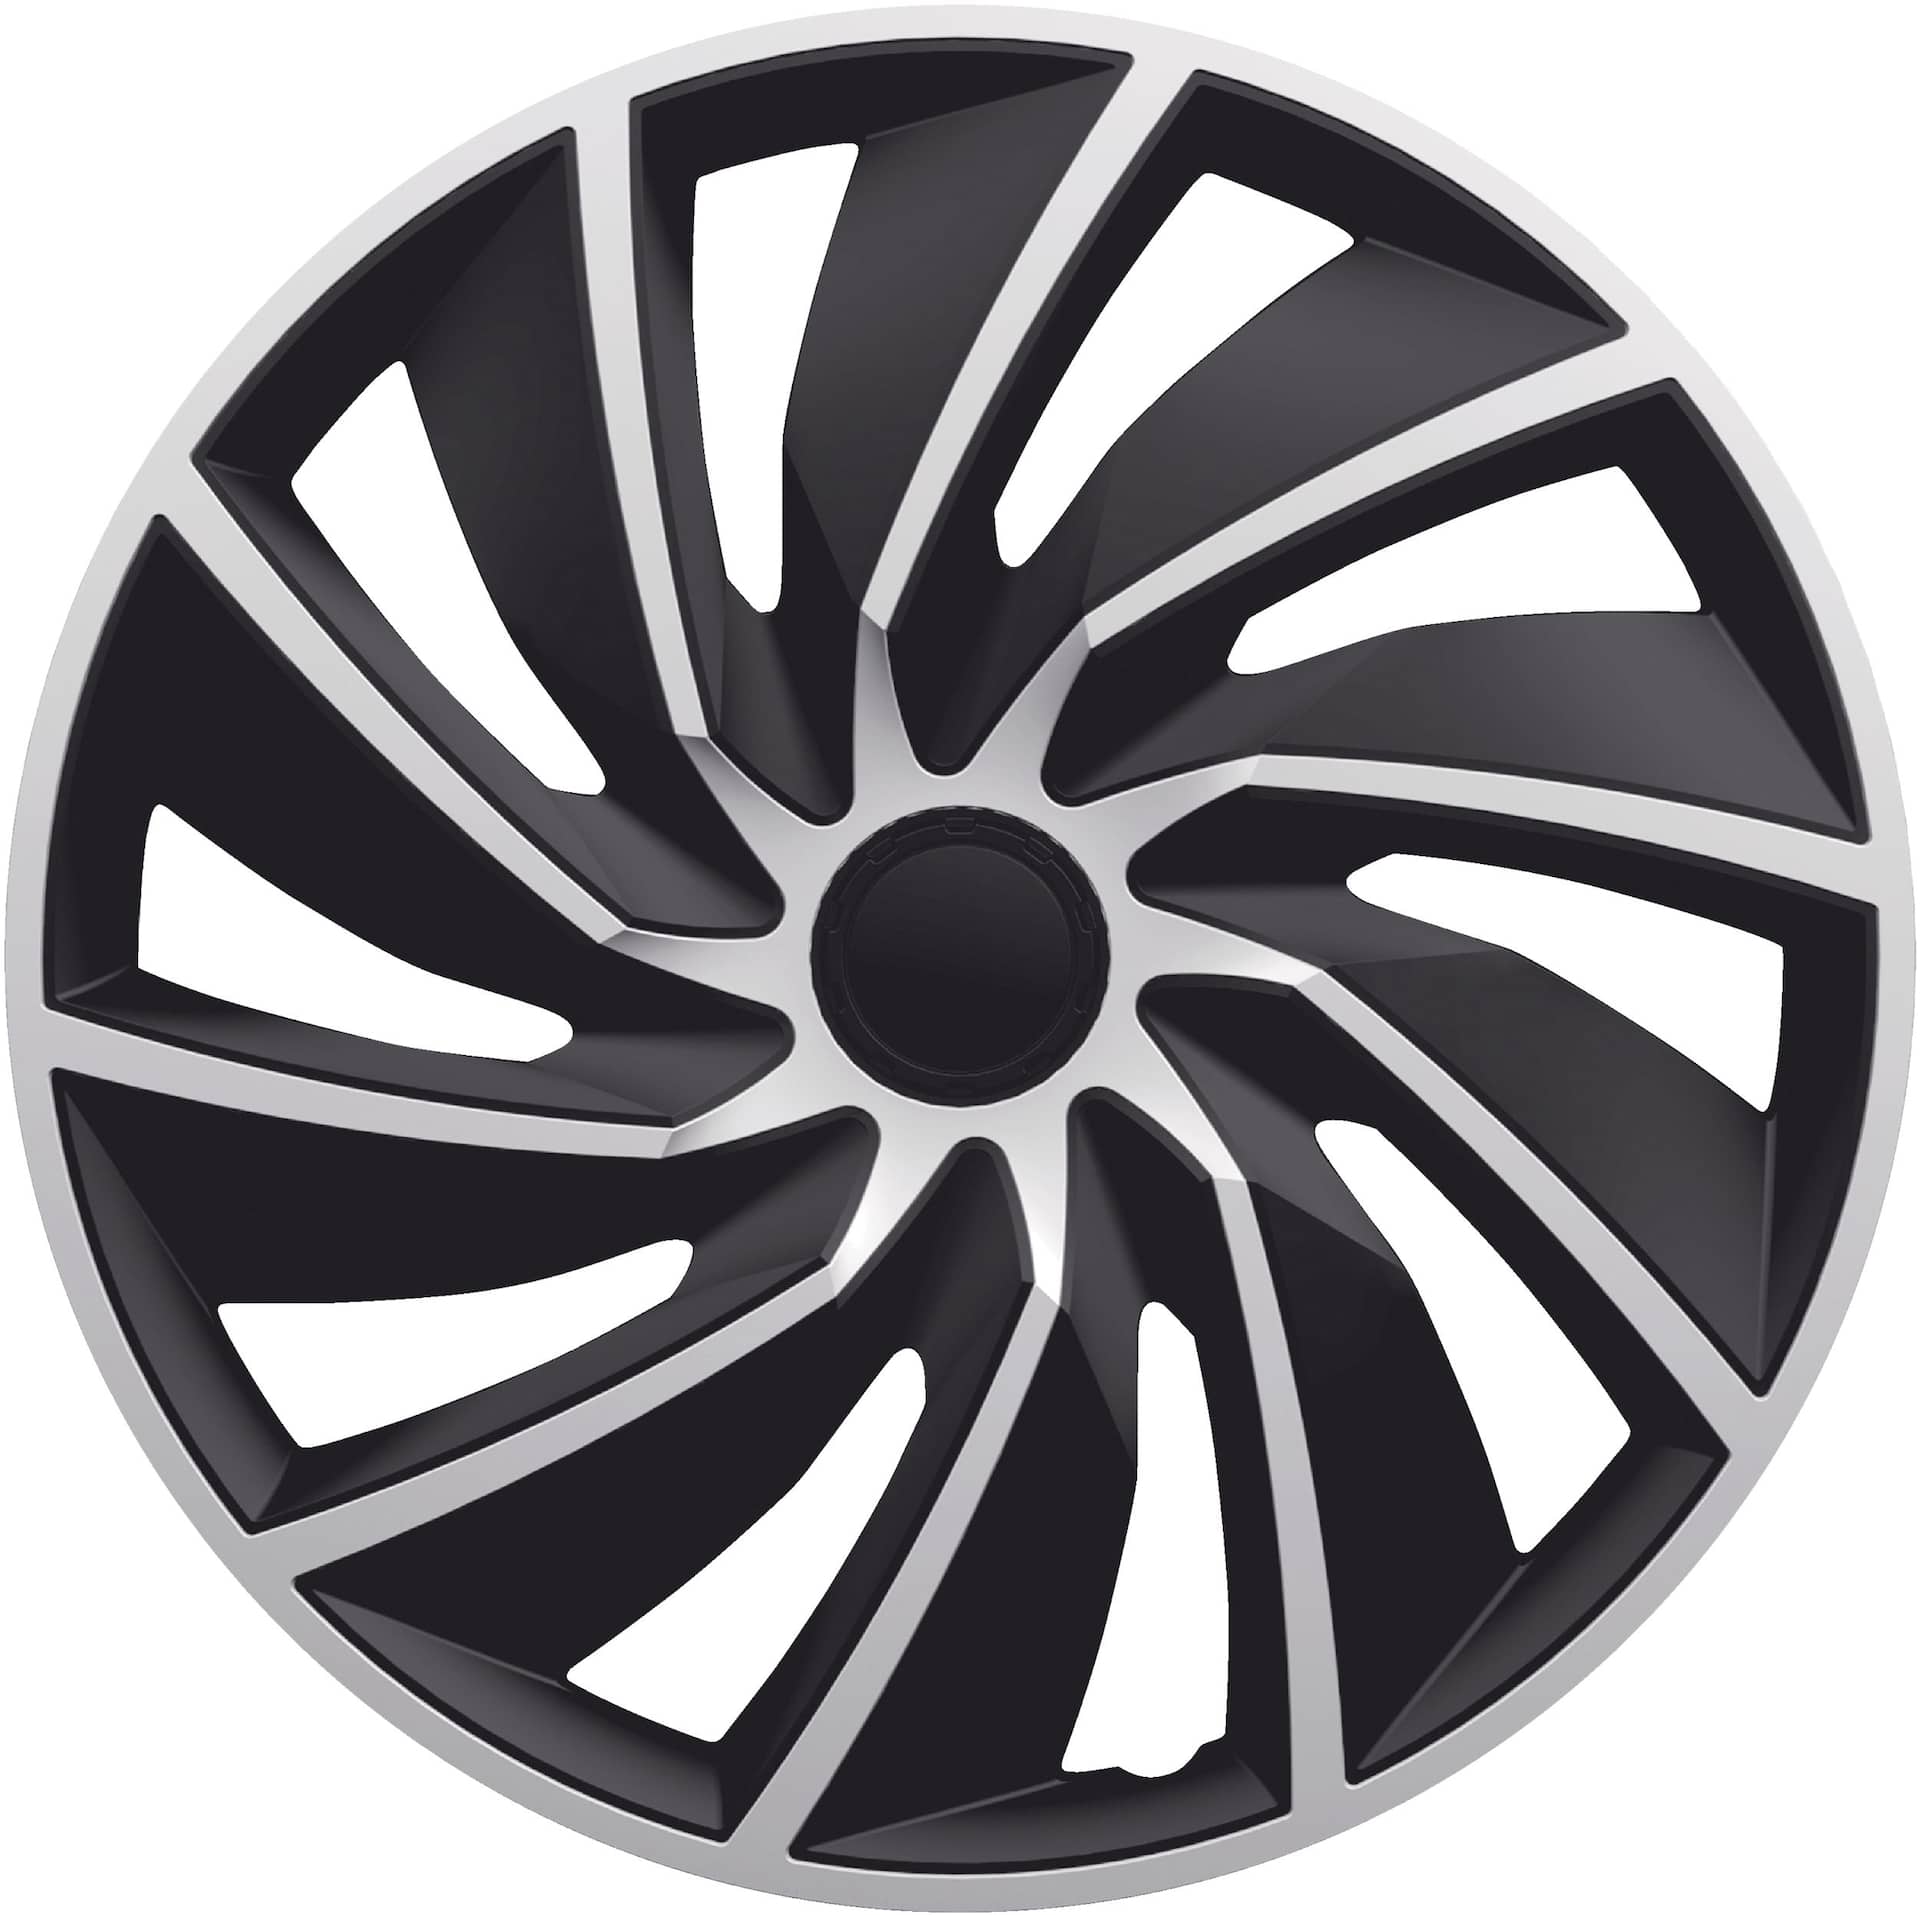 DriveStyle Turbo Wheel Cover, Silver/Black, 18-in, 4-pk Canadian Tire